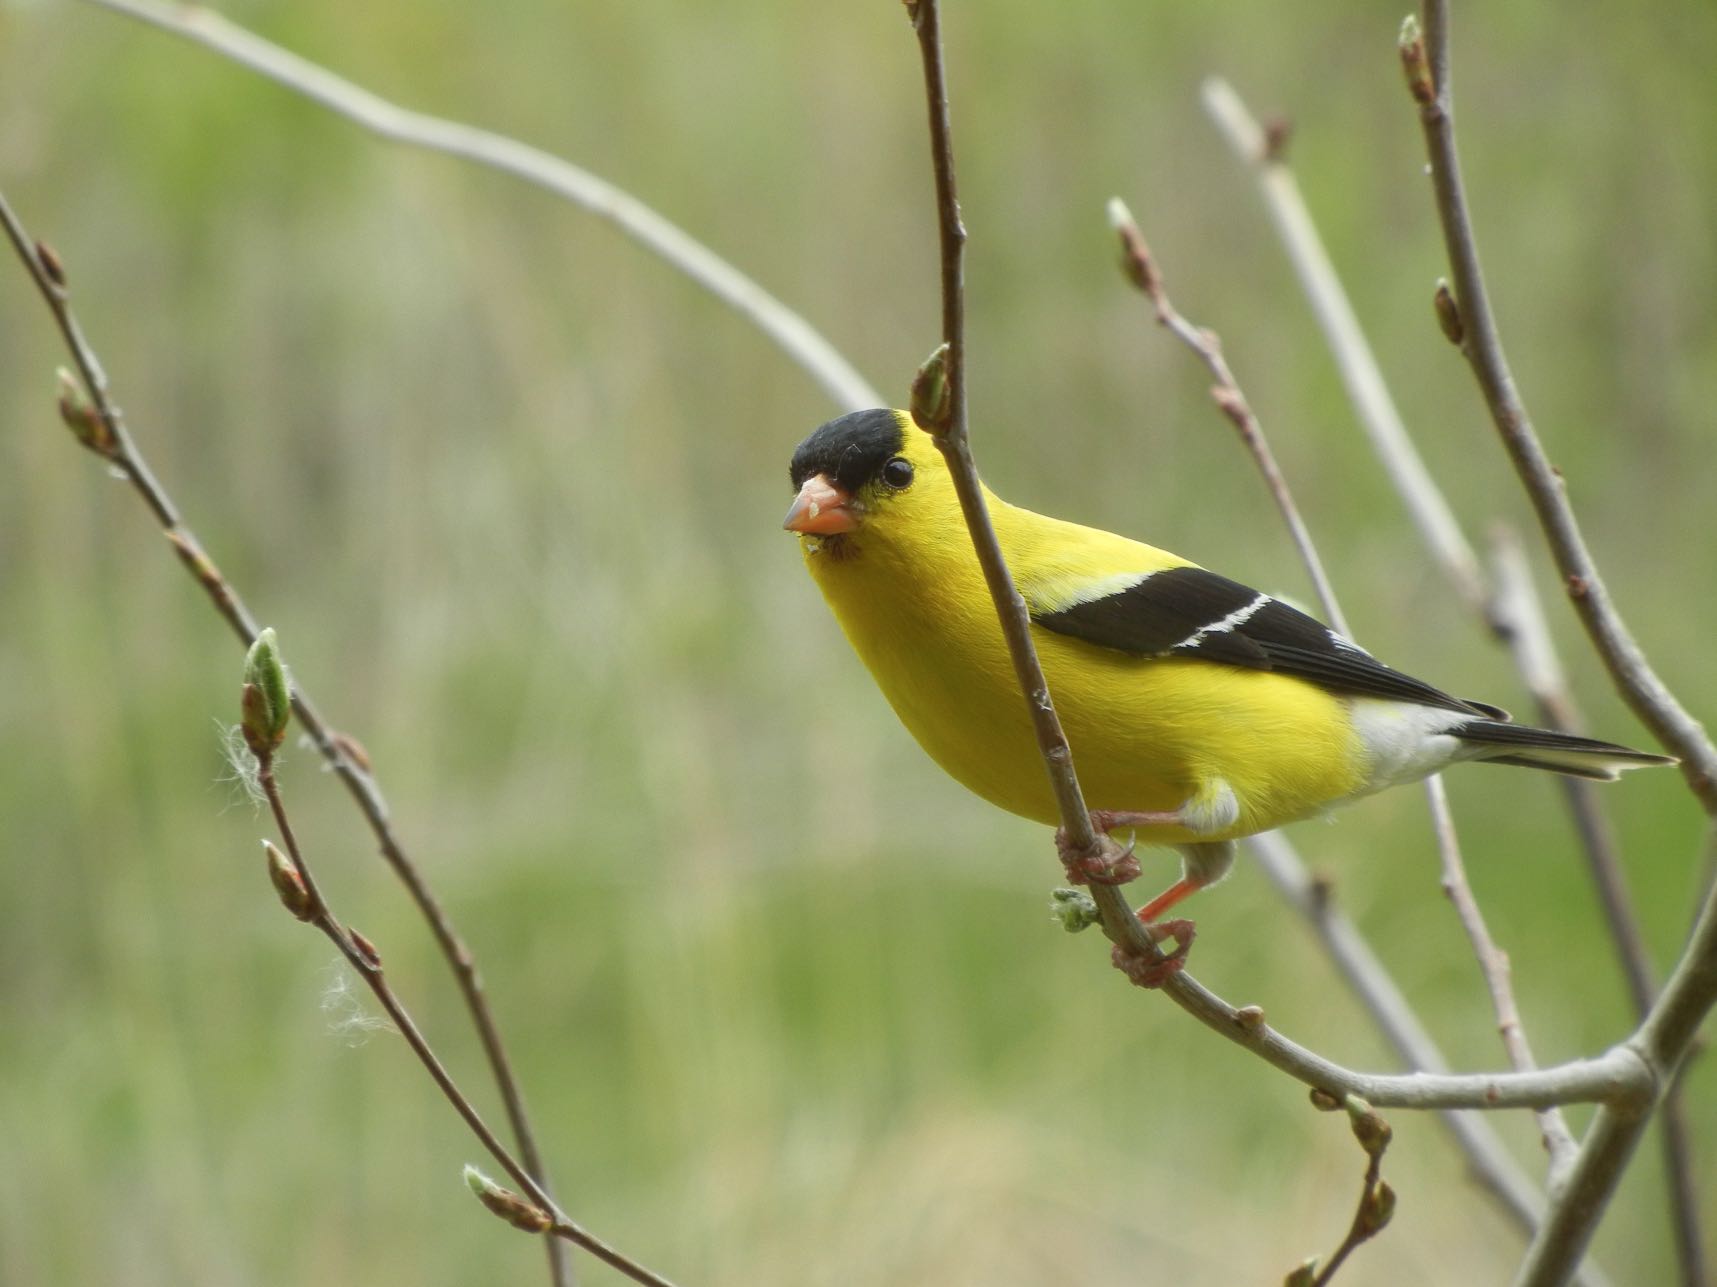 Image of an American Goldfinch